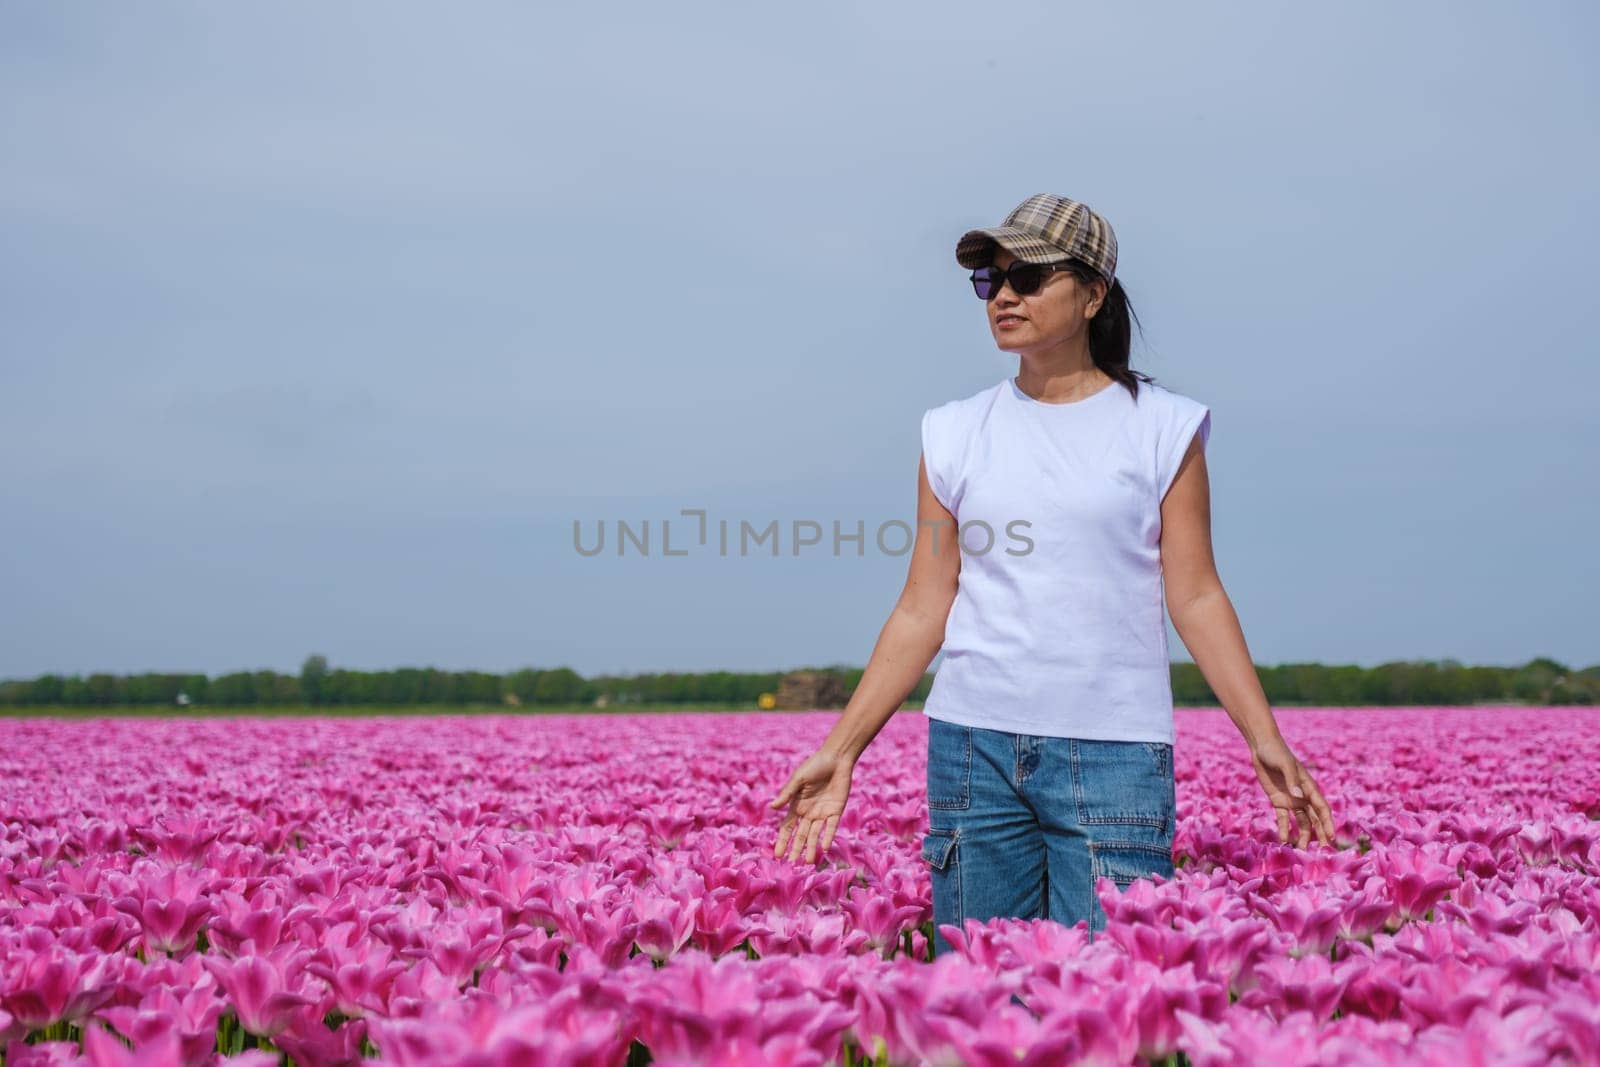 A graceful woman standing amidst a vibrant field of pink tulips in Texel, Netherlands, as the colorful flowers sway with the gentle breeze.